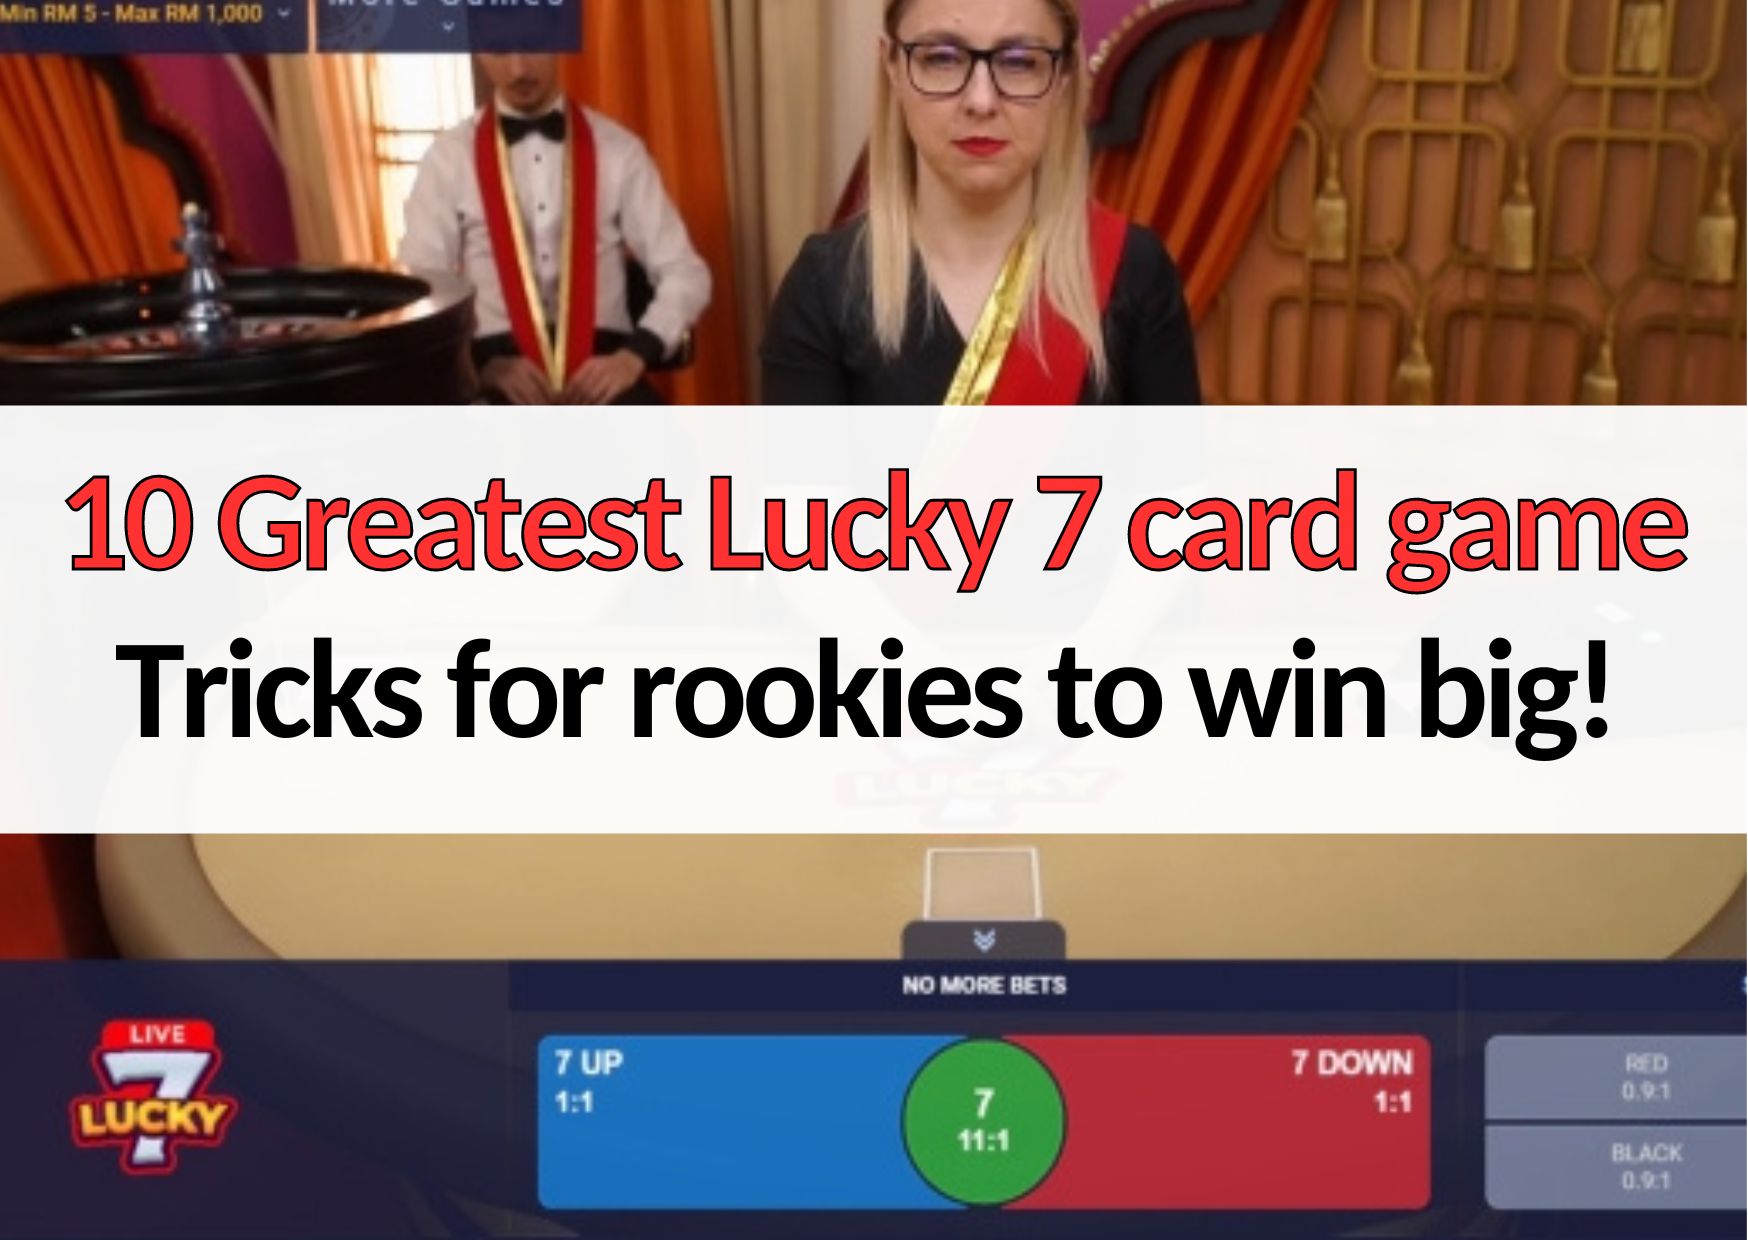 10 greatest lucky 7 card game tricks for rookies to win